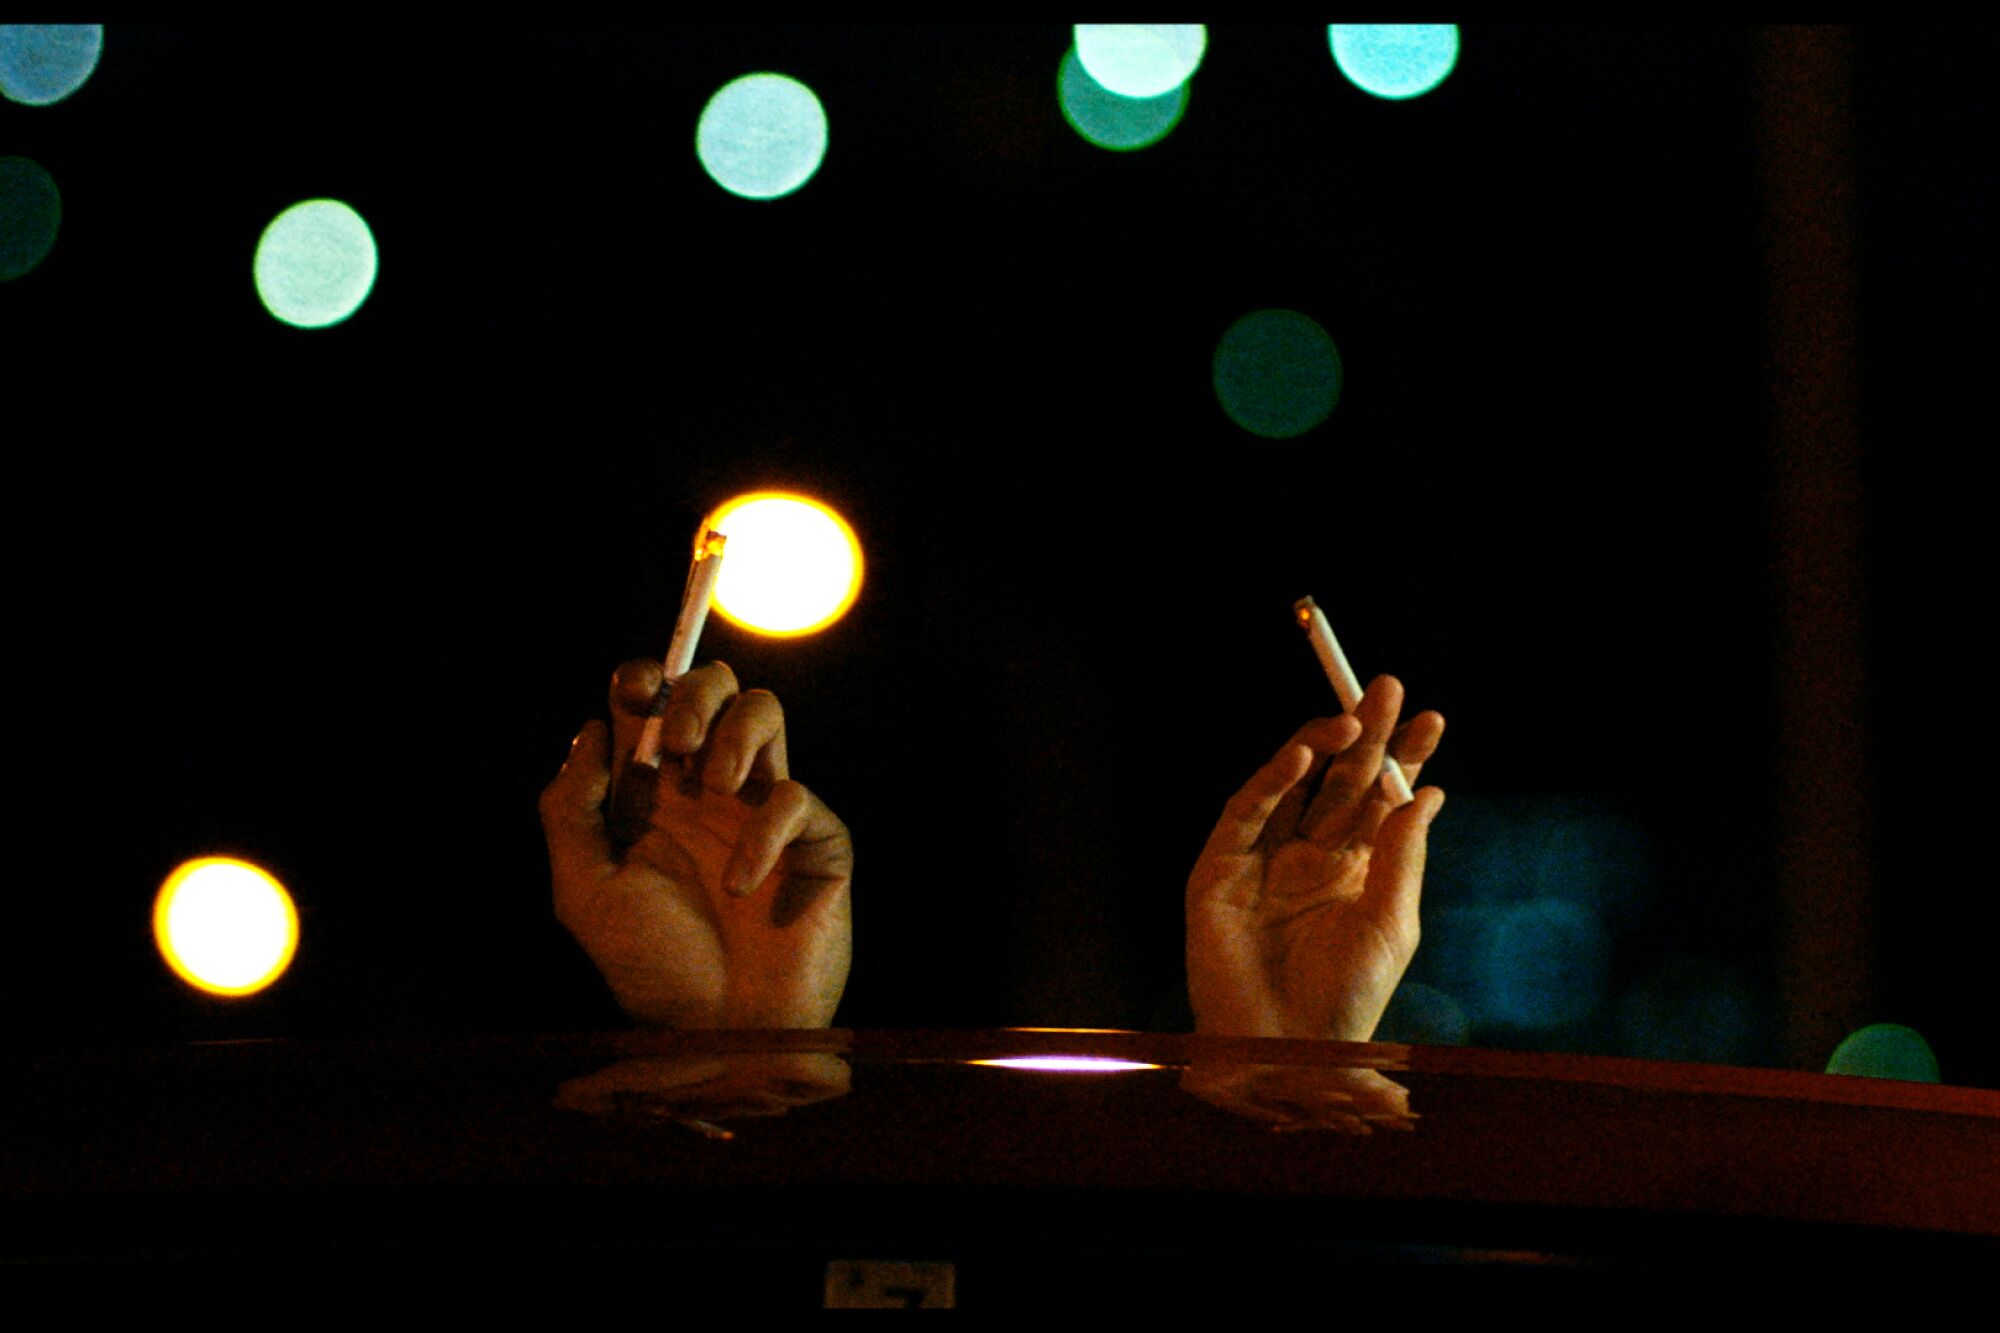 Two hands holding cigarettes stick up through a car's sunroof in a scene from "Drive My Car."